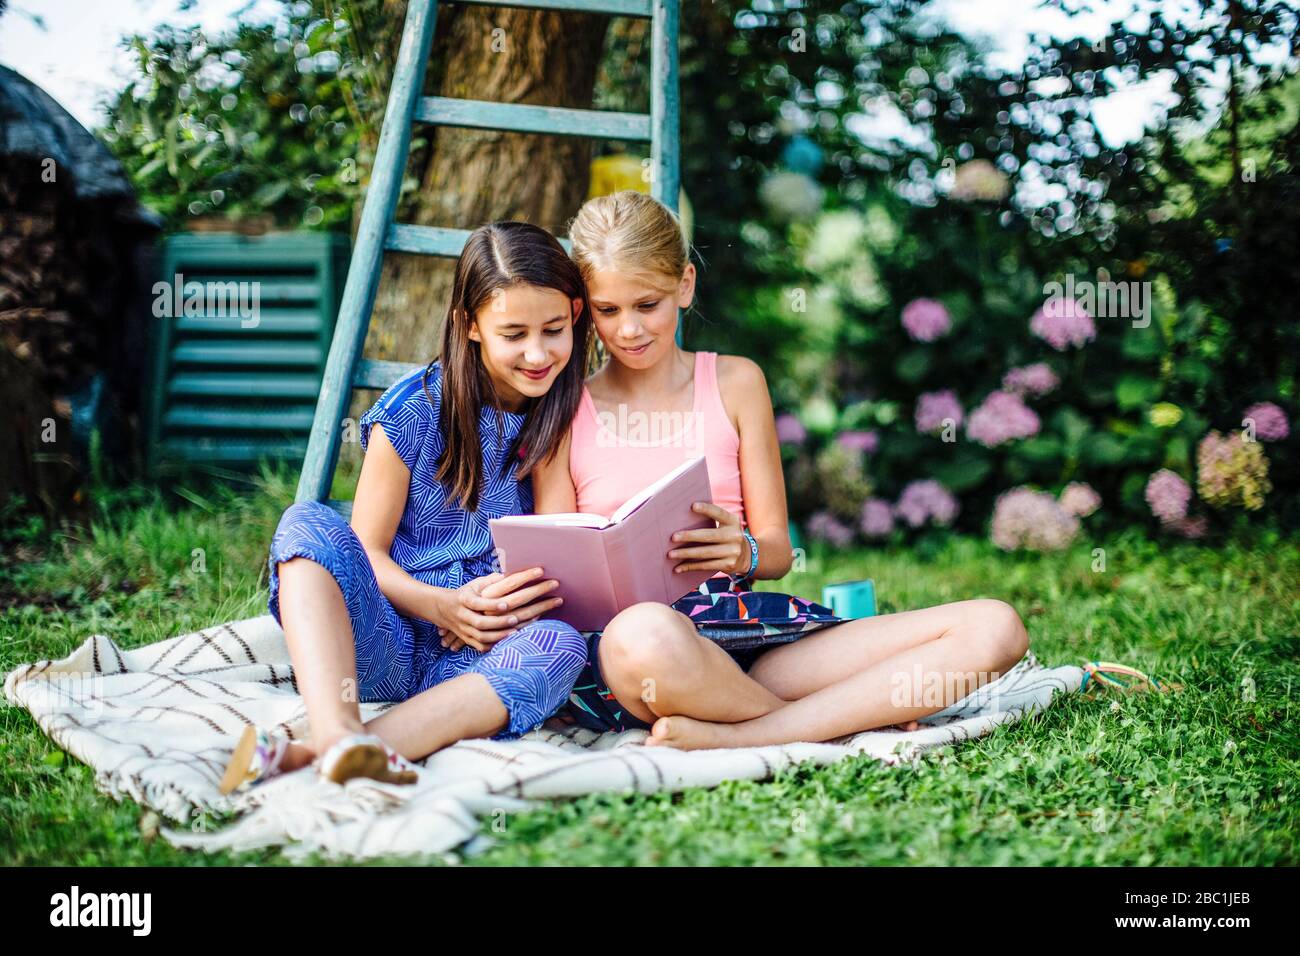 Smiling girls reading a book in garden together Stock Photo